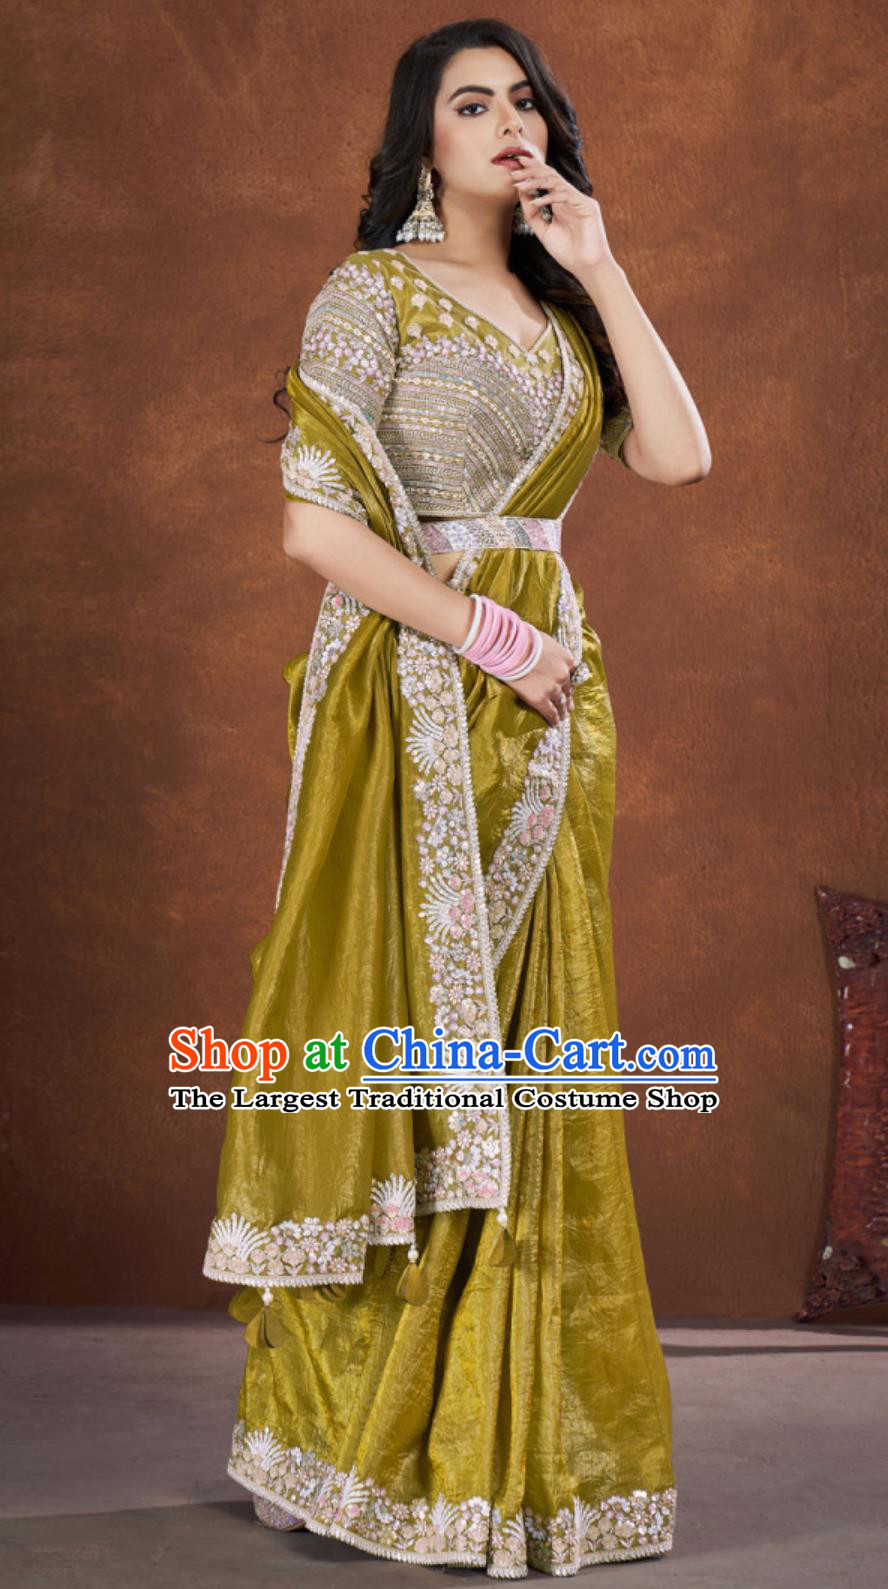 Indian Traditional Women Clothing India Embroidery Ginger Dress Festival Sari National Costume